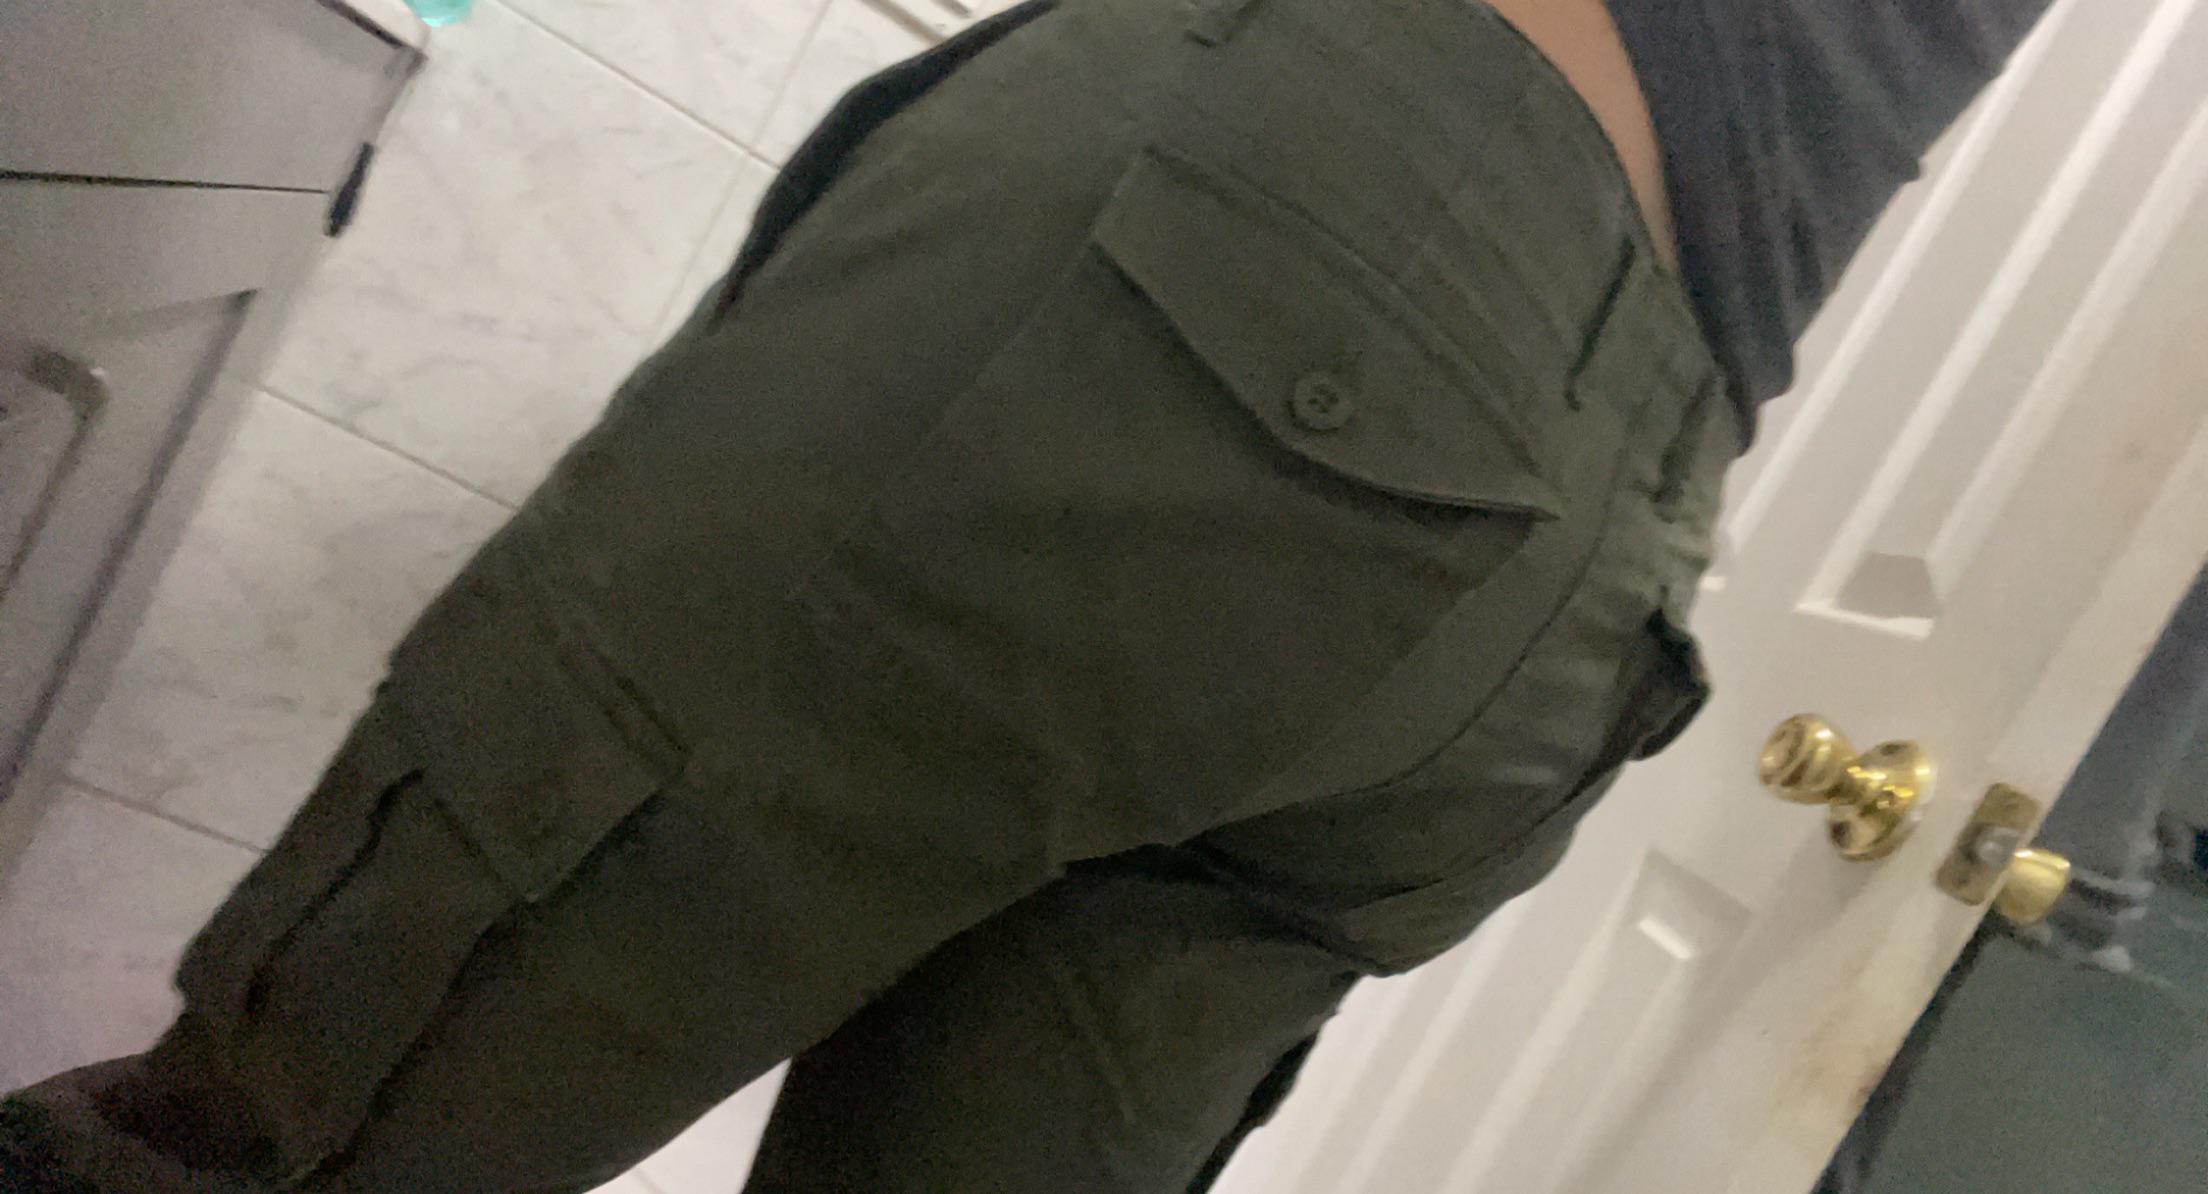 Thought my butt looked cute in these cargo pants | Scrolller